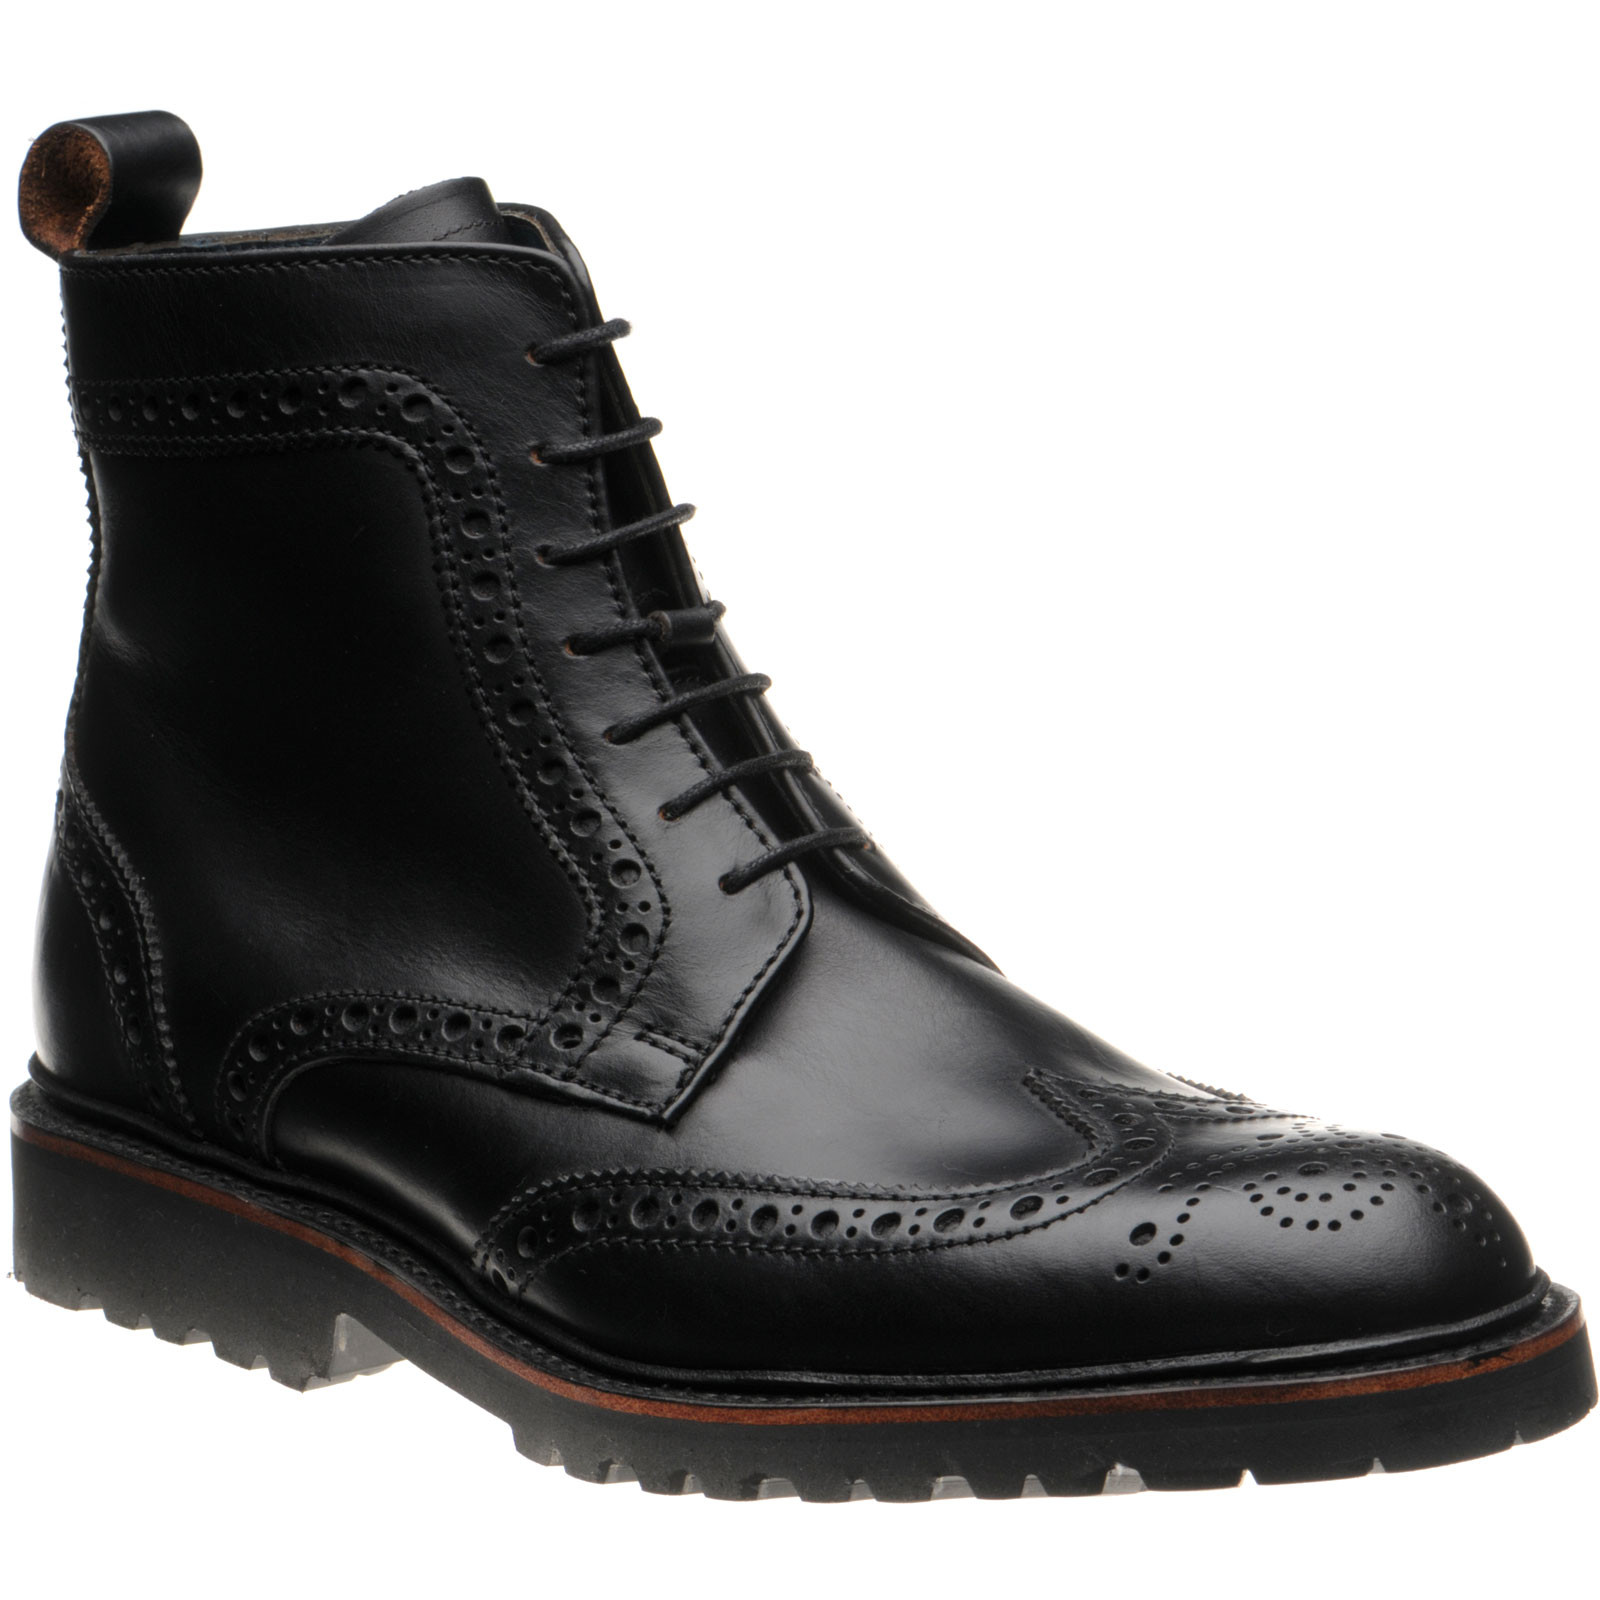 Barker shoes | Barker Creative | Woodbury rubber-soled brogue boots in ...